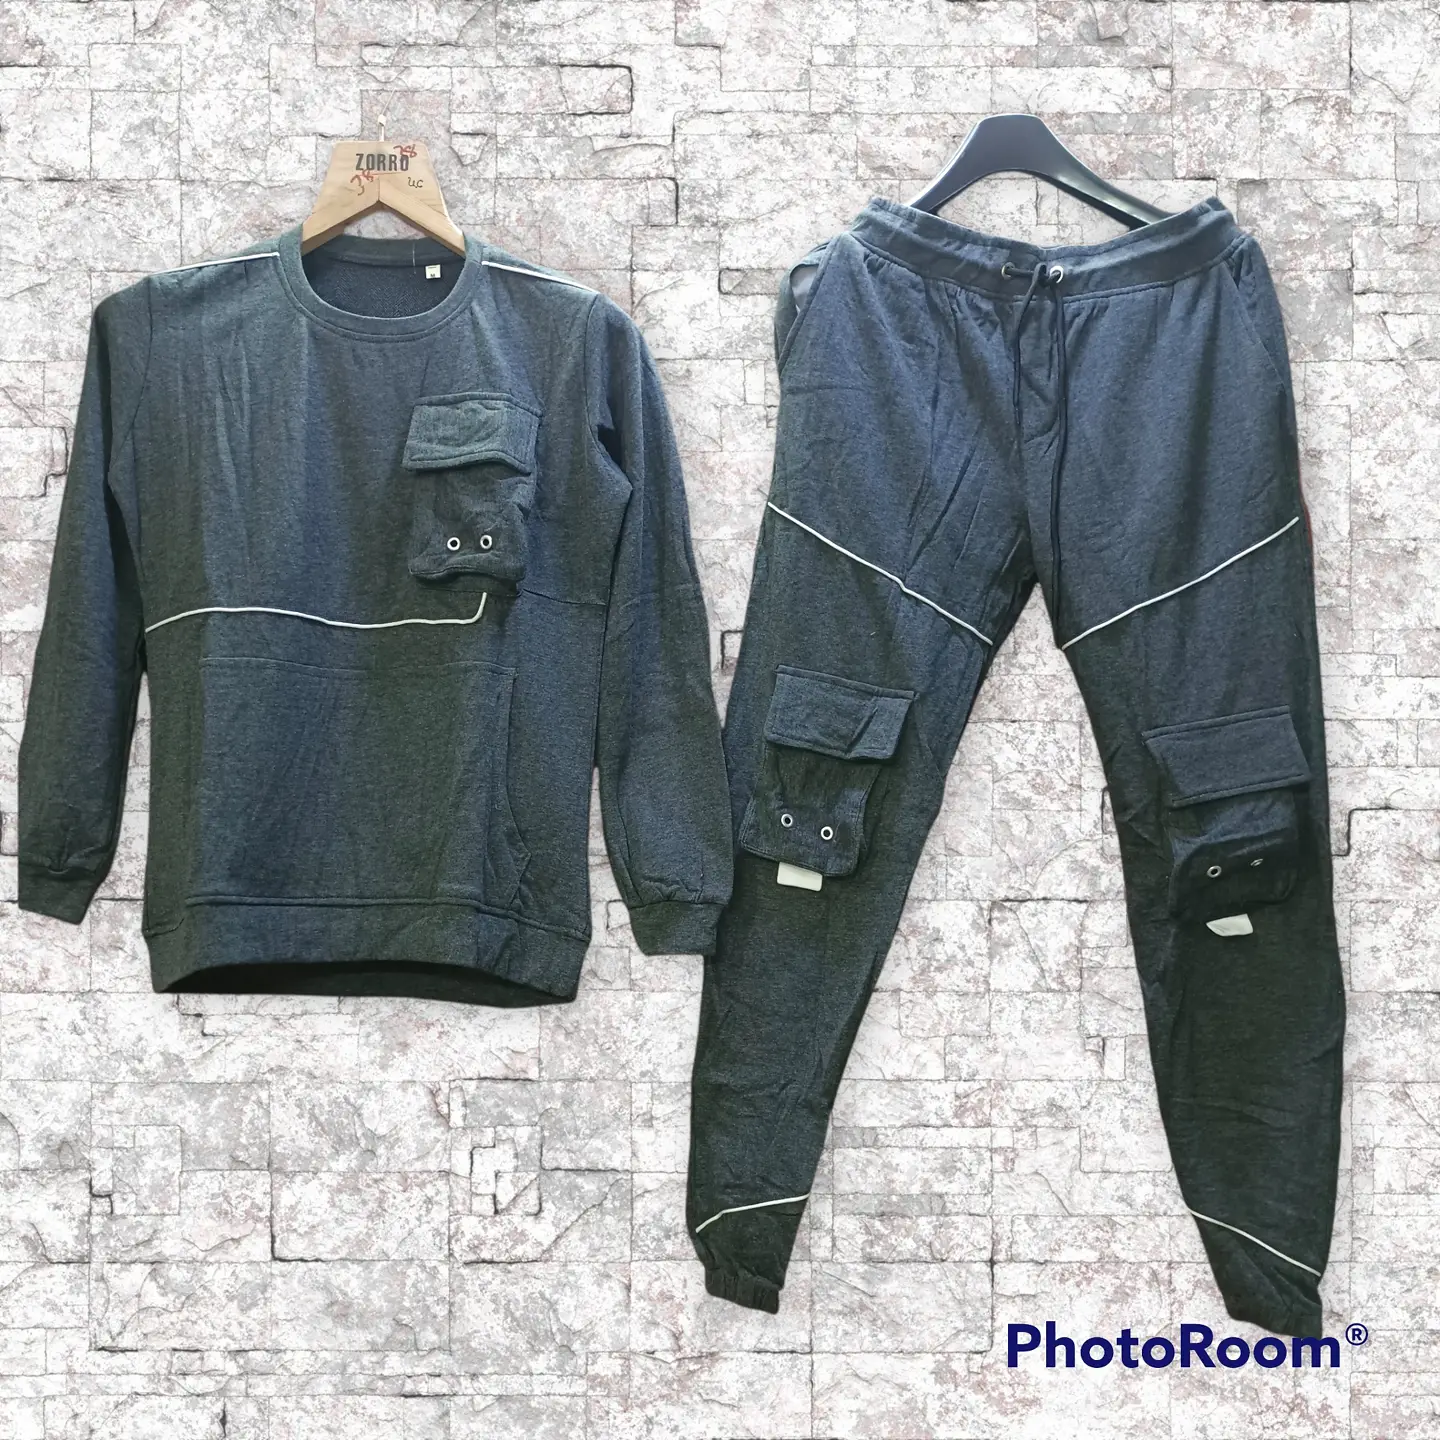 Product image with price: Rs. 1200, ID: imported-track-suit-298b035a